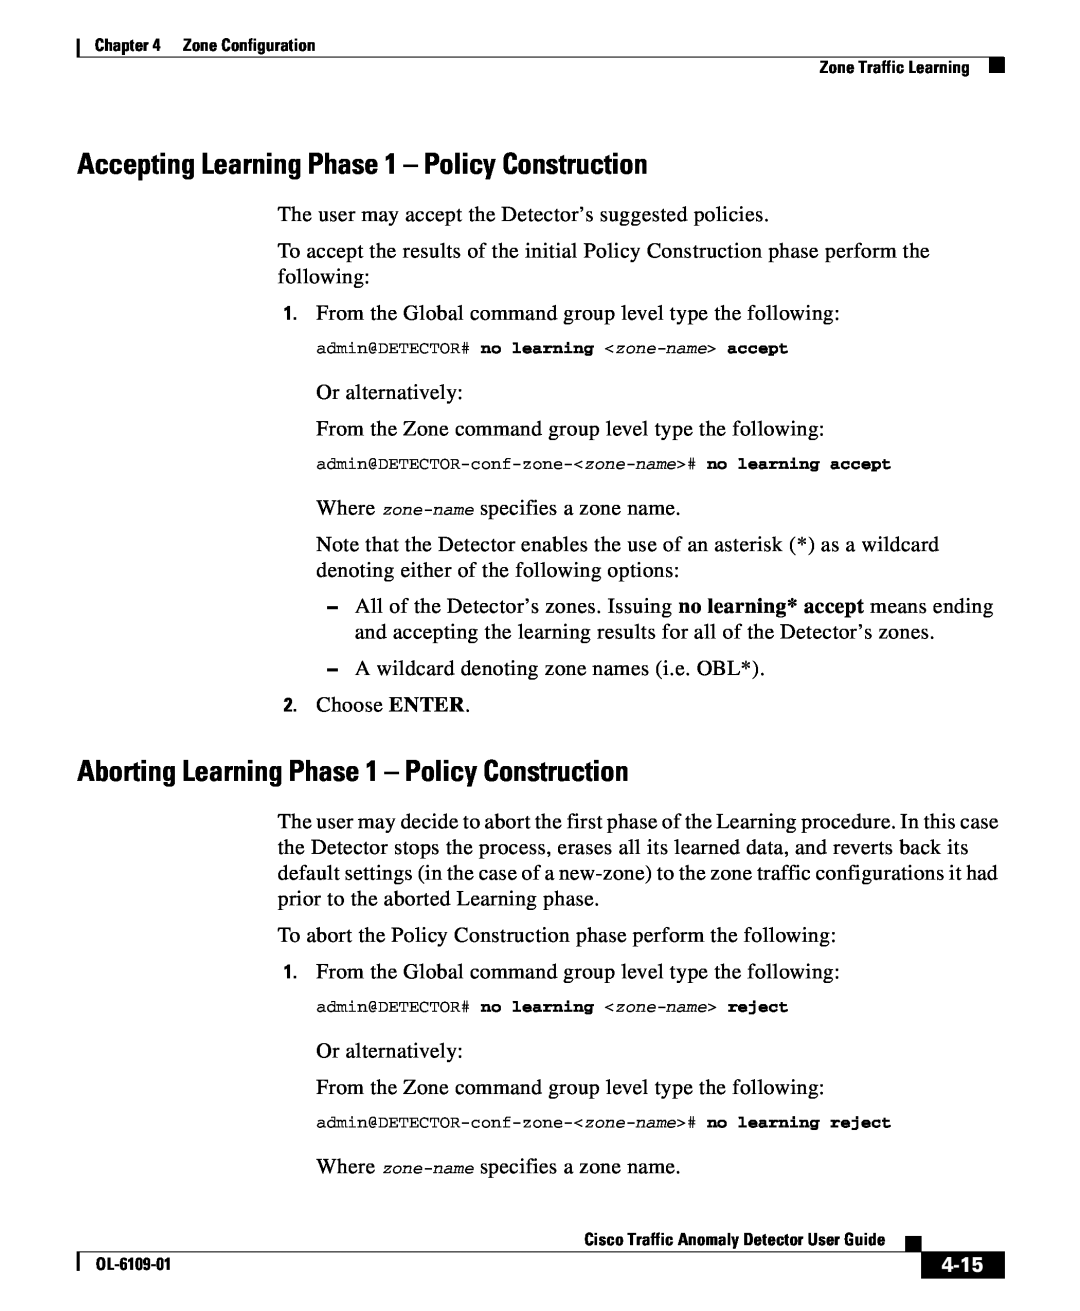 Cisco Systems OL-6109-01 Accepting Learning Phase 1 - Policy Construction, Aborting Learning Phase 1 - Policy Construction 